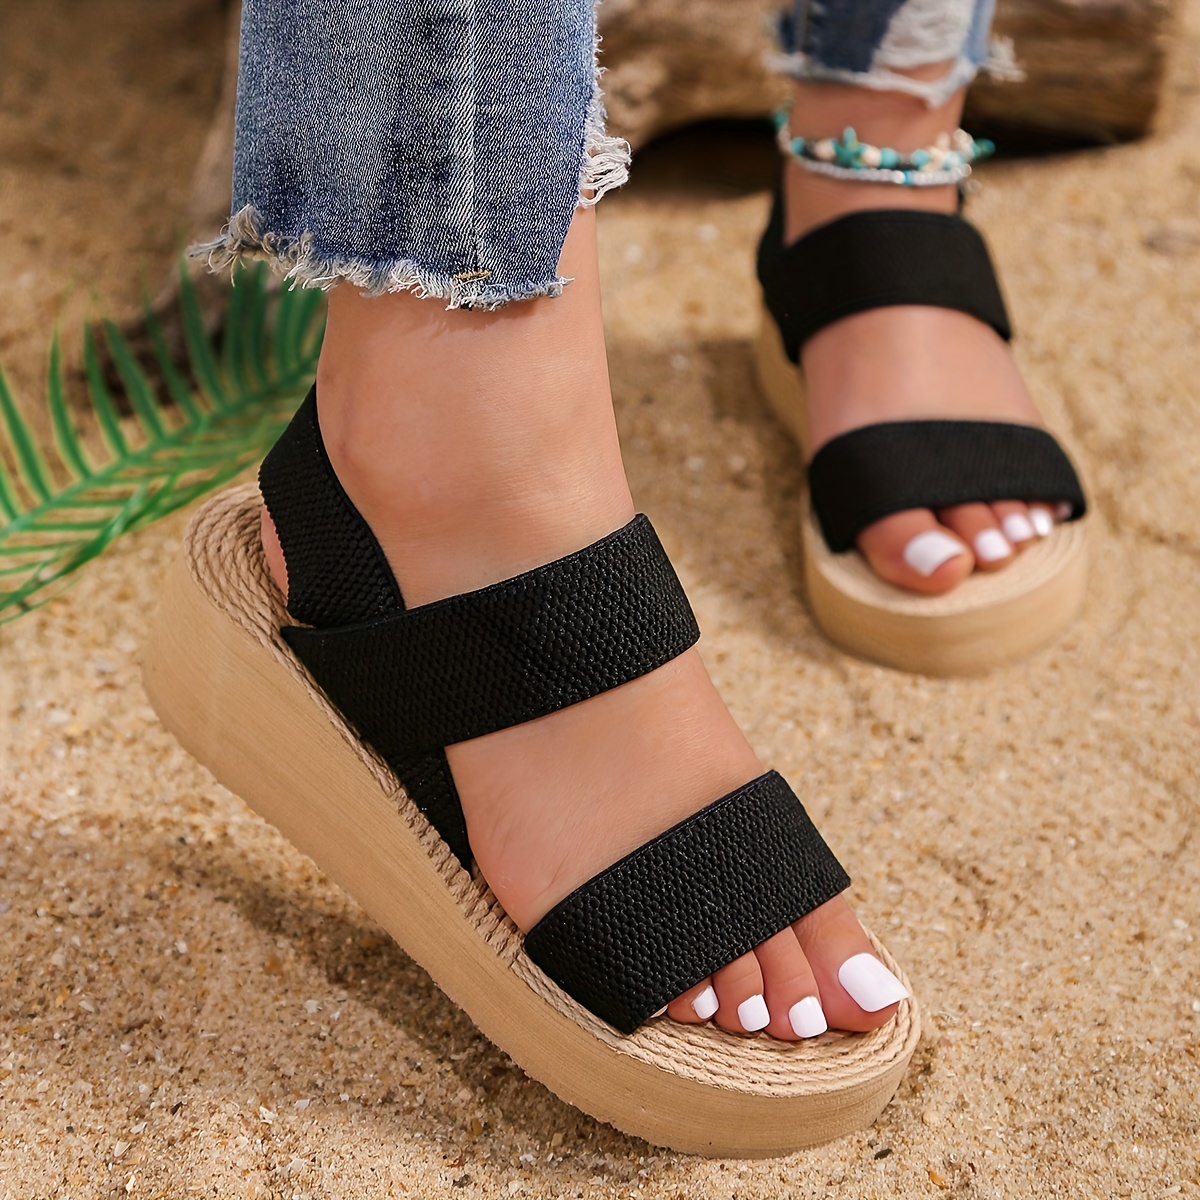 FROH FEET Women' Platform Multi Wedges High Heel Fashion Sandal Comfortable  and Stylish Wedge For Casual